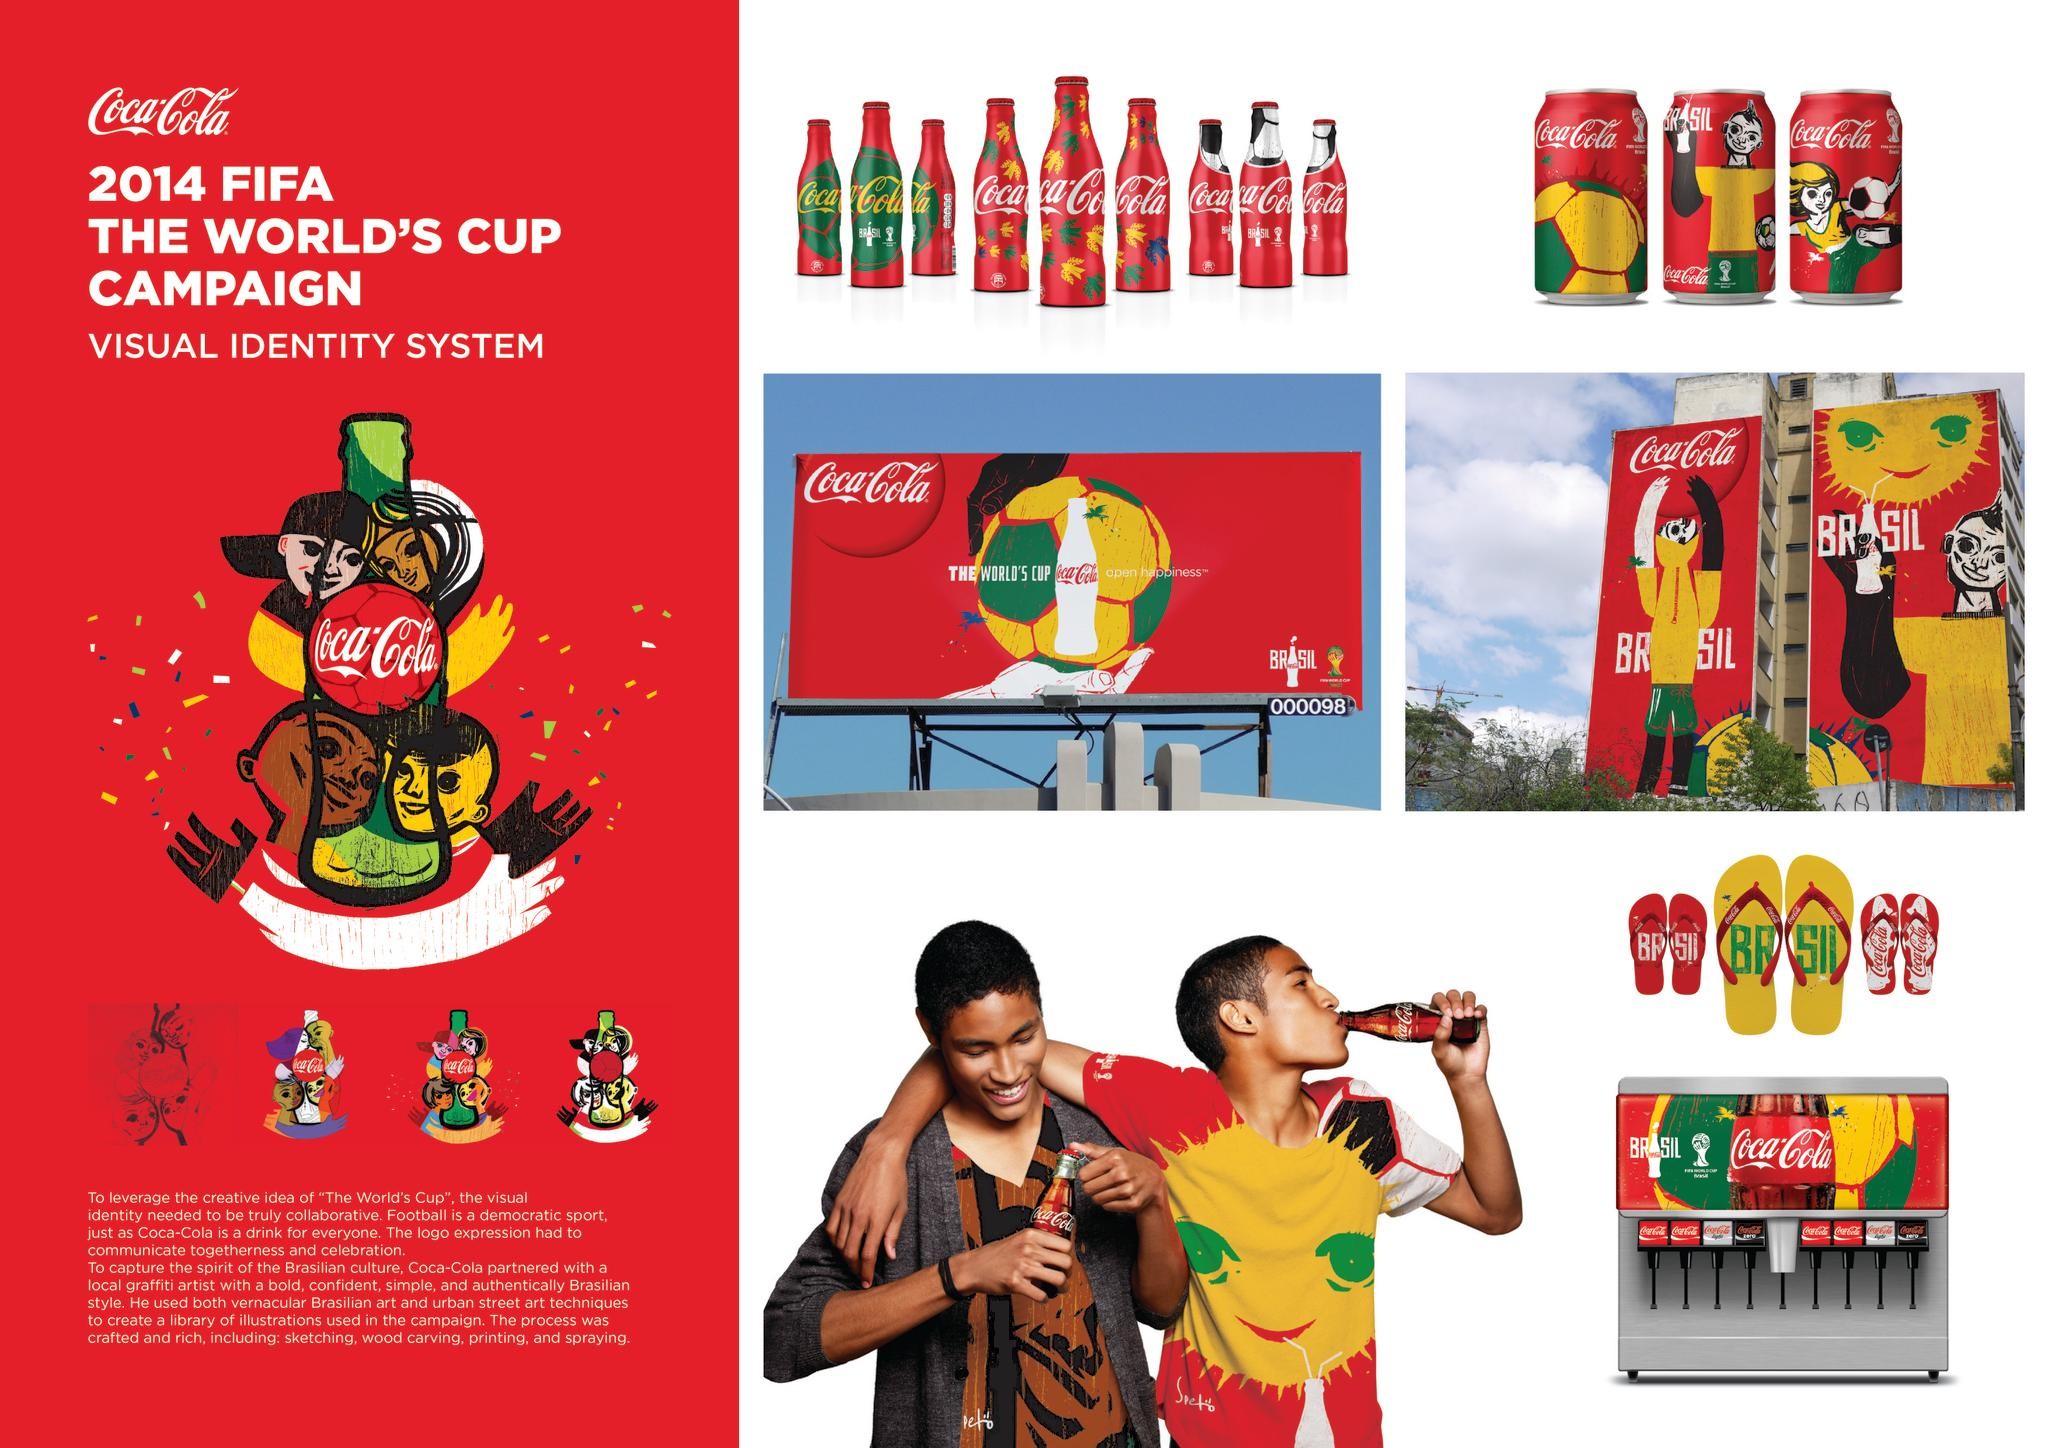 2014 FIFA THE WORLD'S CUP CAMPAIGN